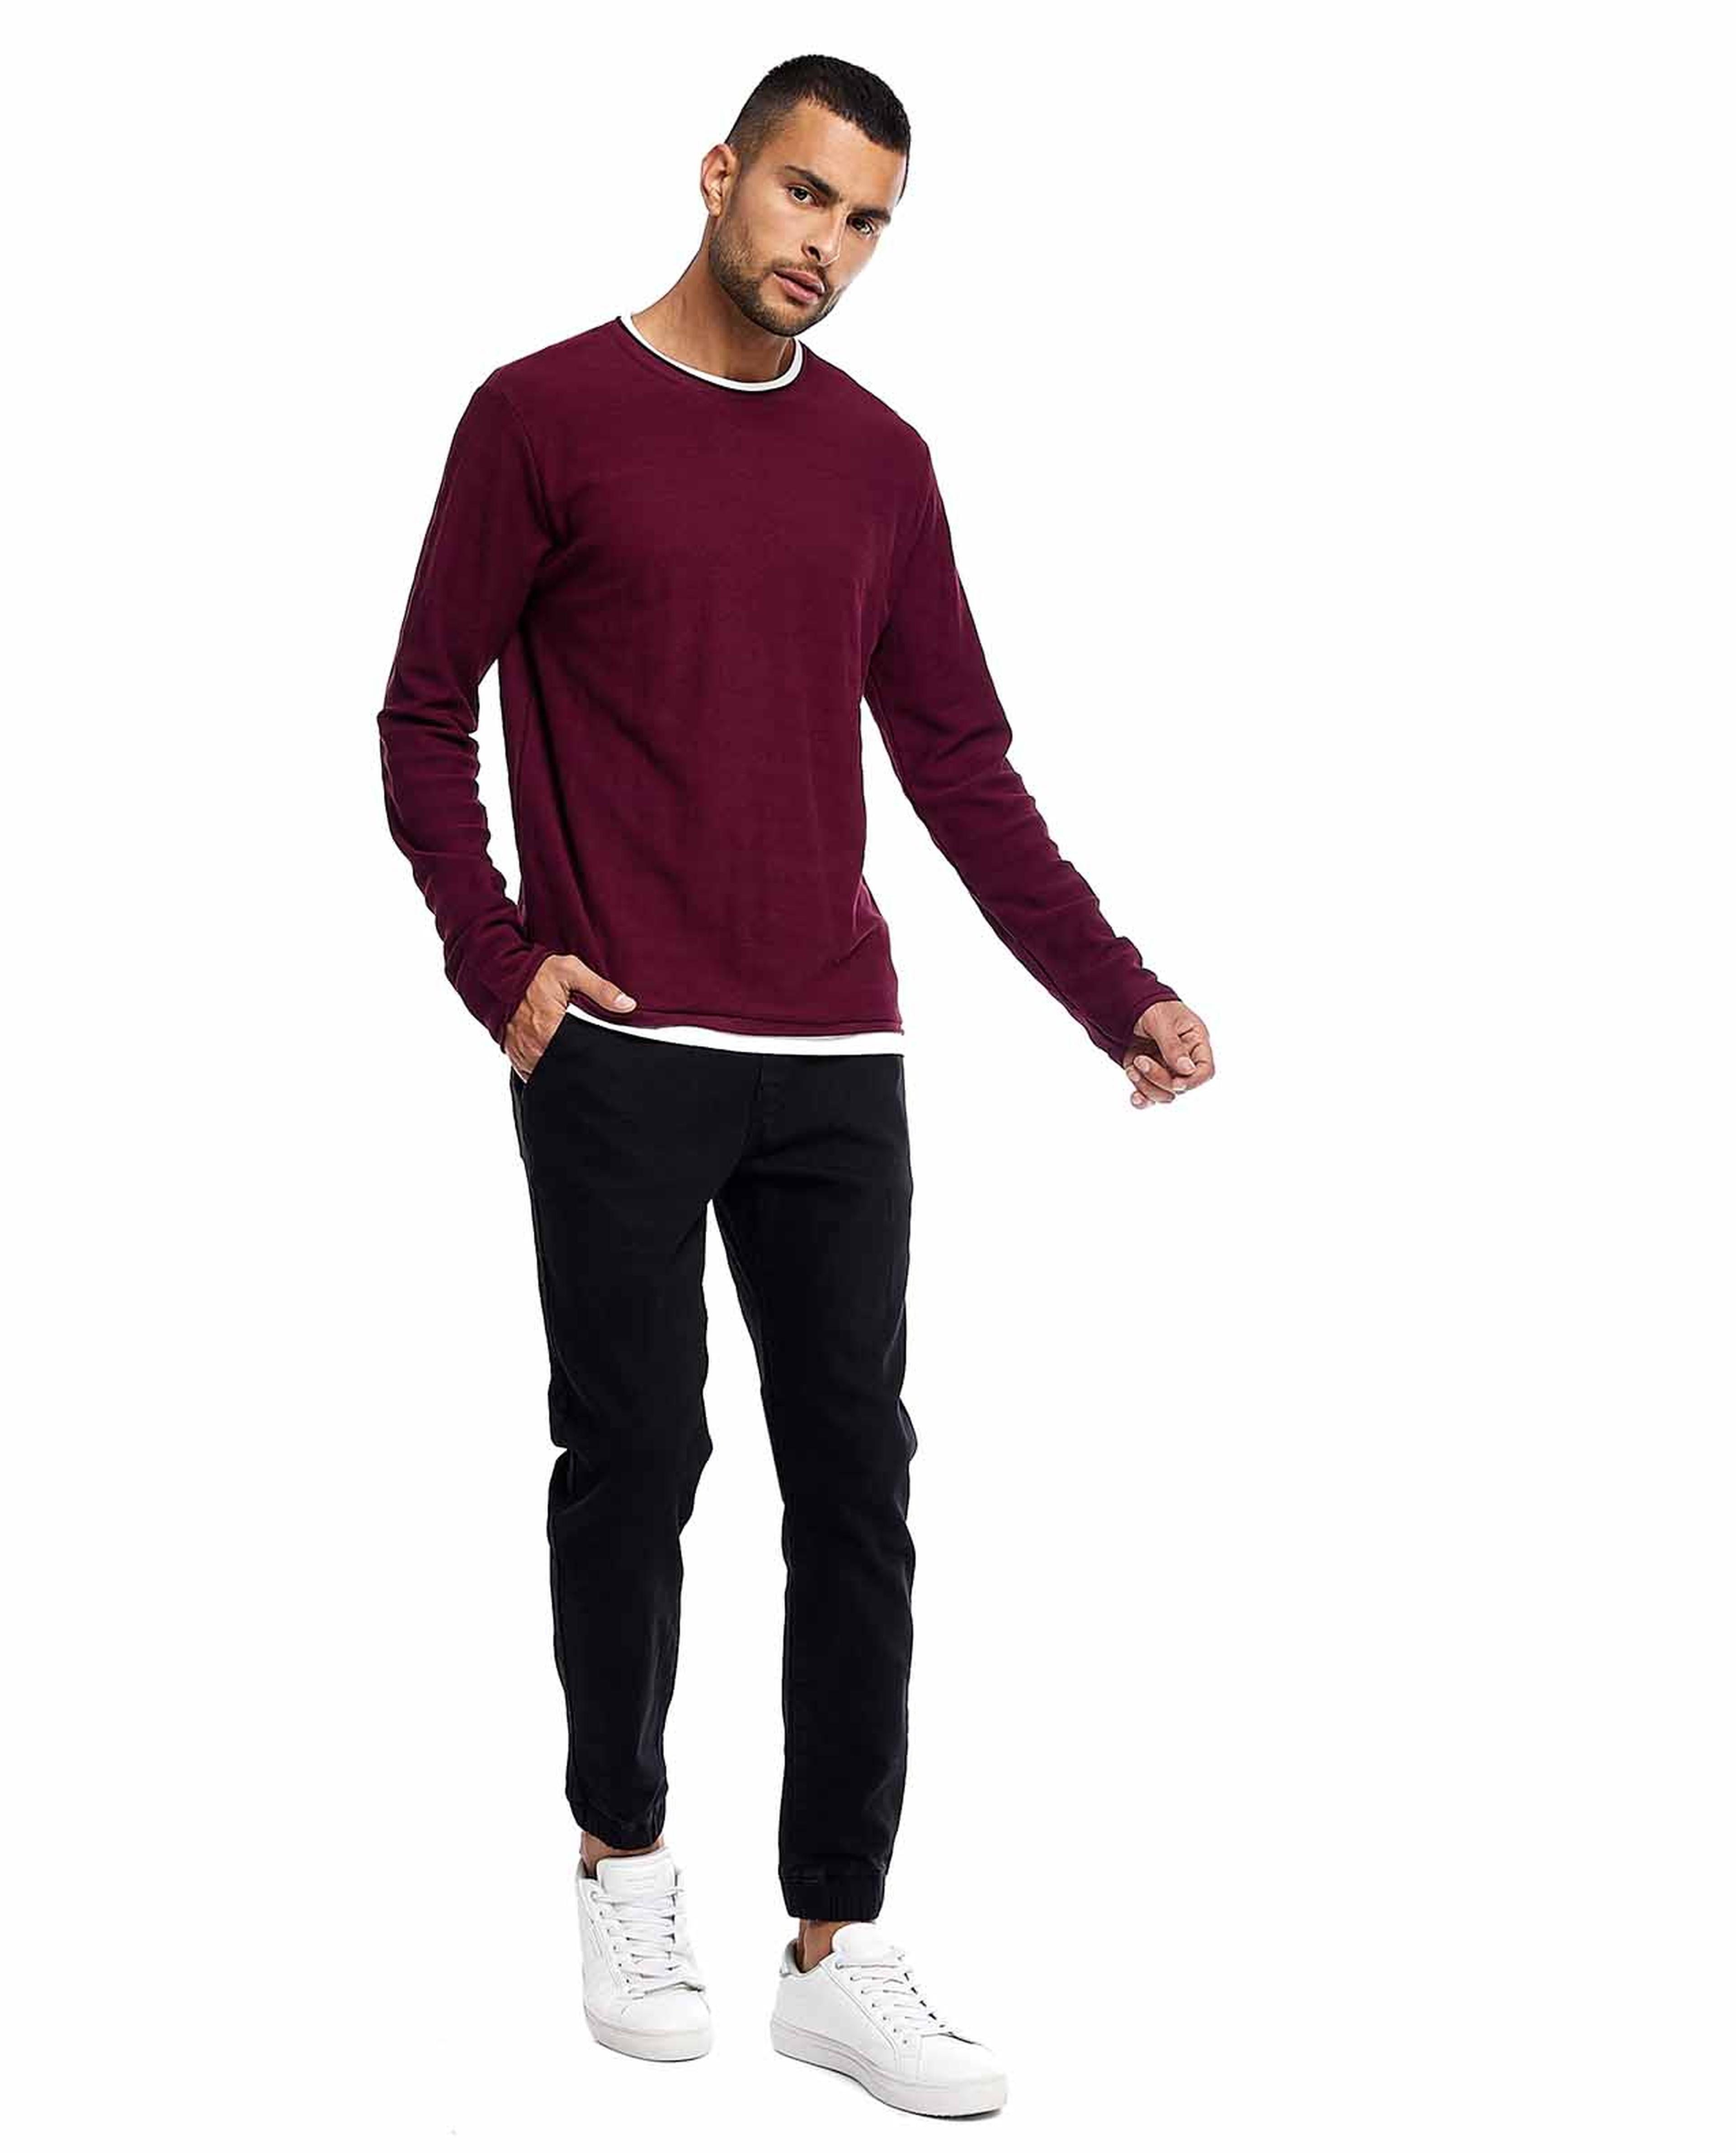 Self Patterned T-Shirt with Crew Neck and Long Sleeves